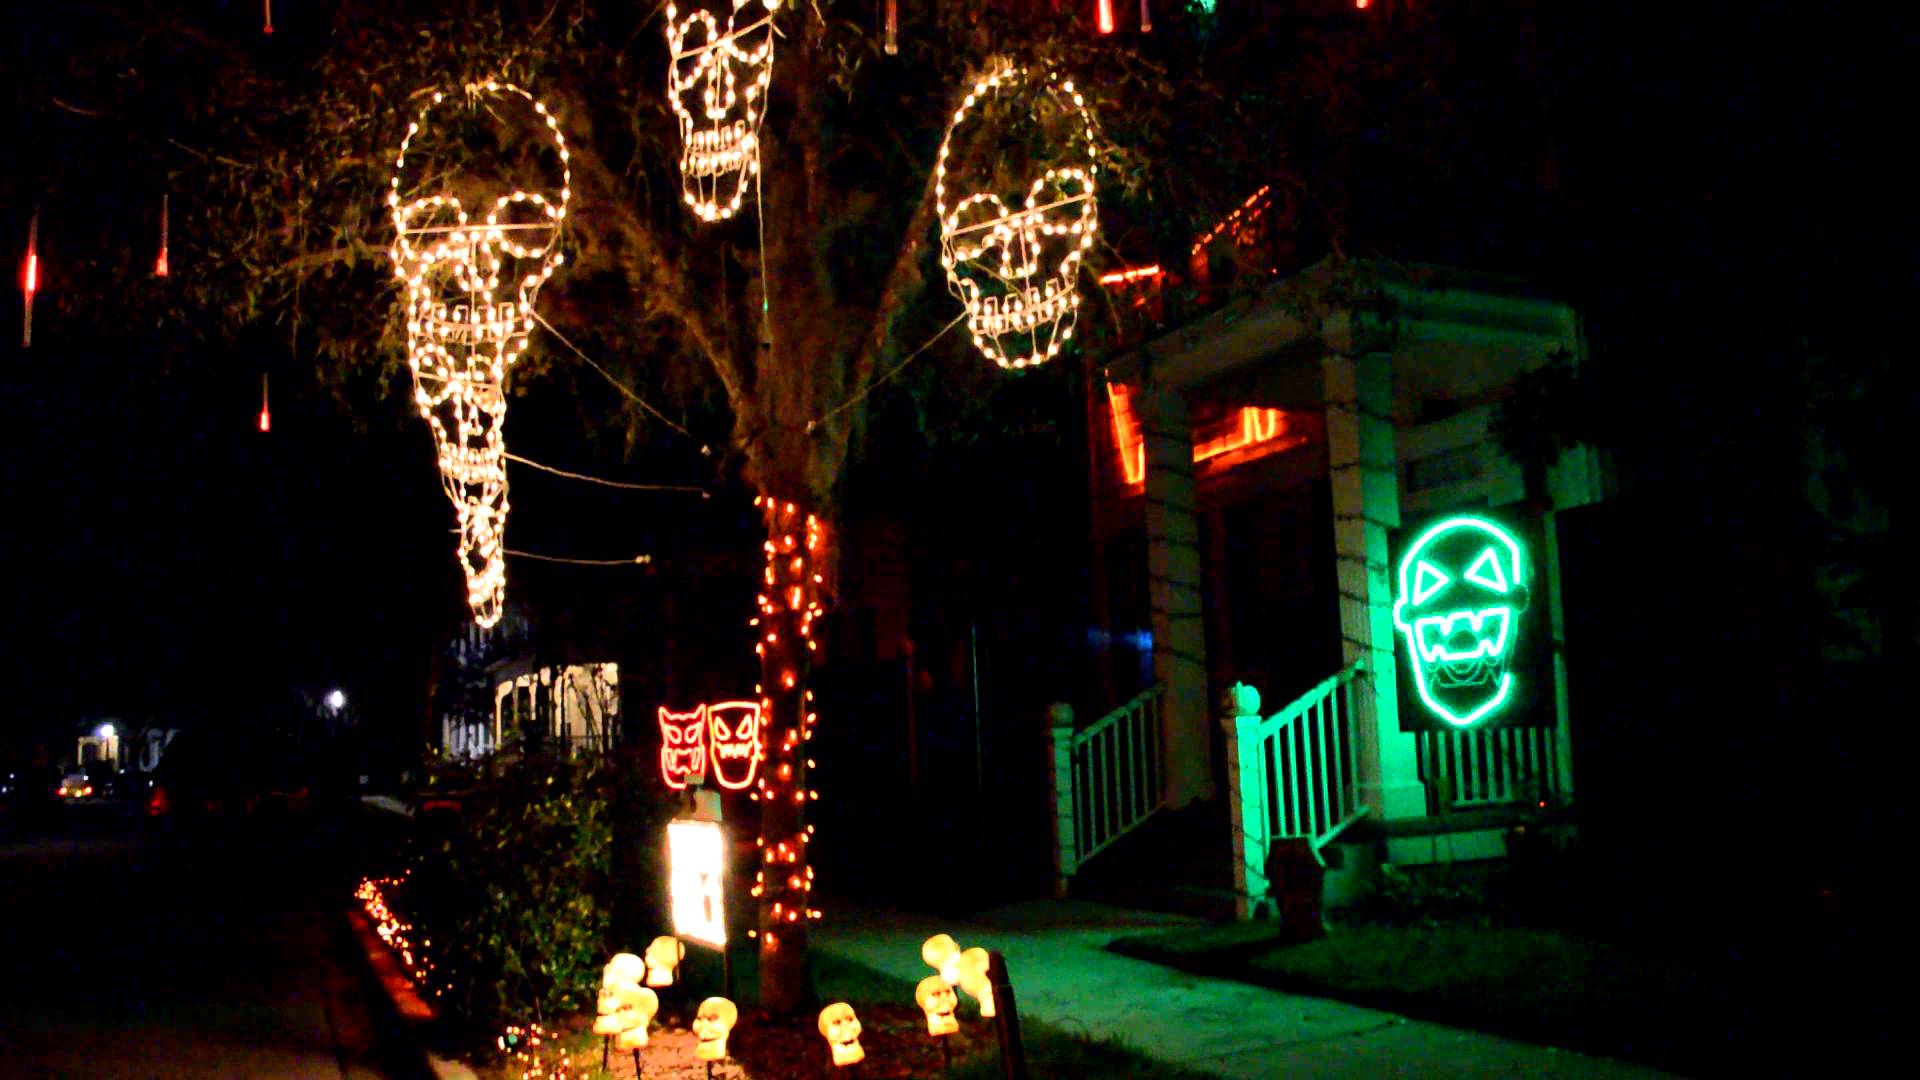 Incredible Halloween Lights and Sound Outdoor Decorations - YouTube